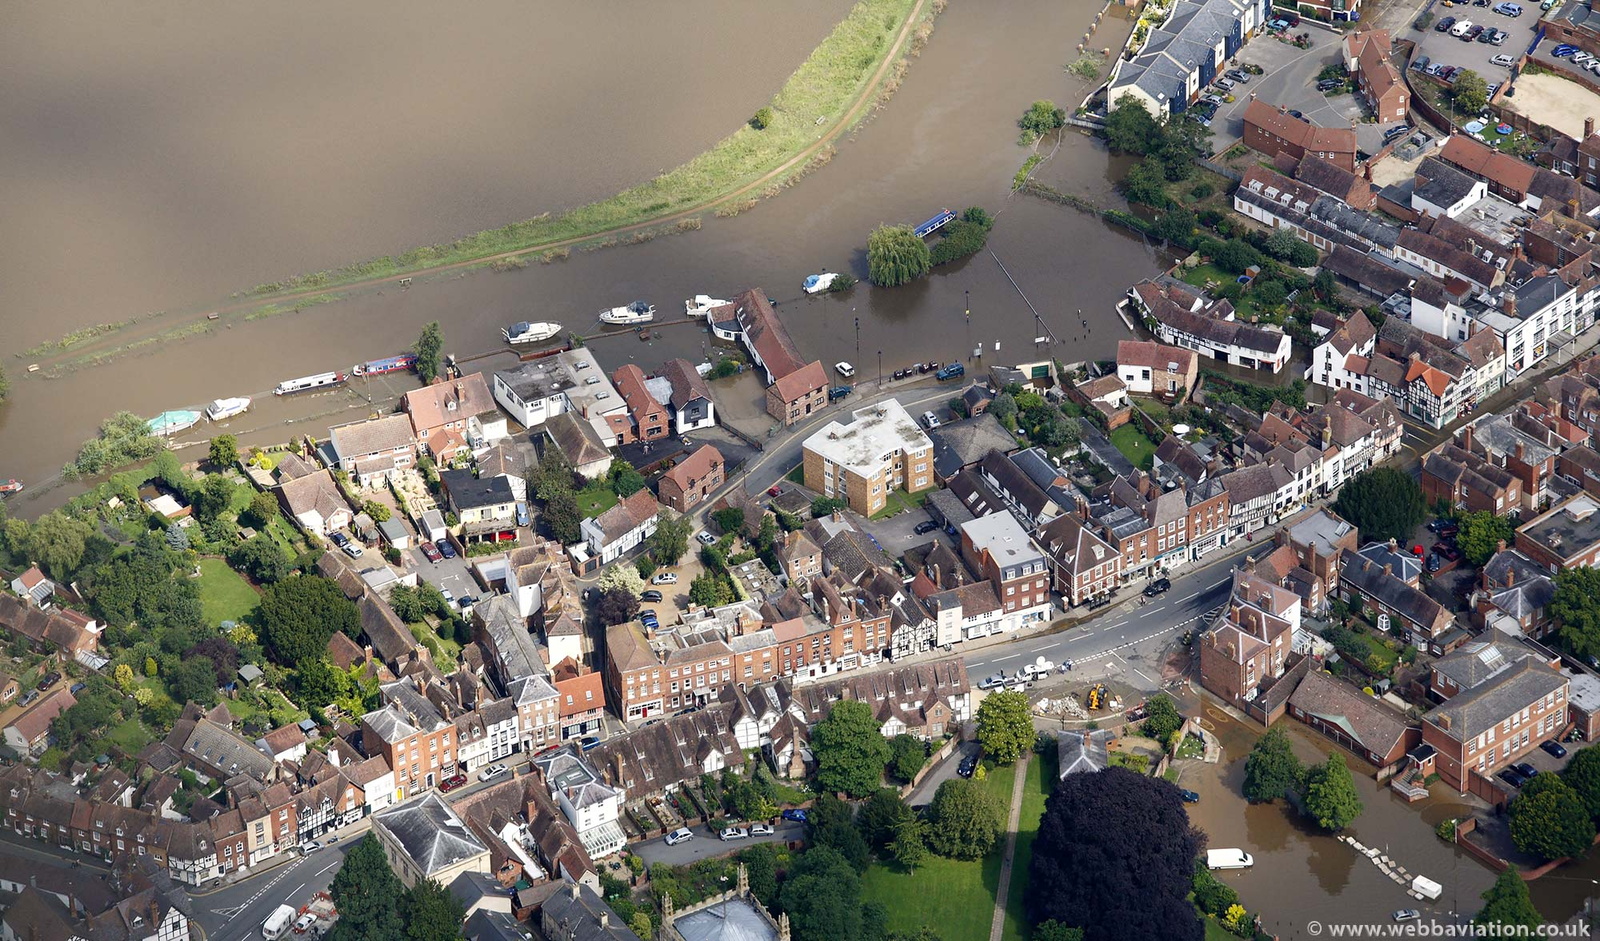  Church Street Tewkesbury during the great floods of 2007 from the air